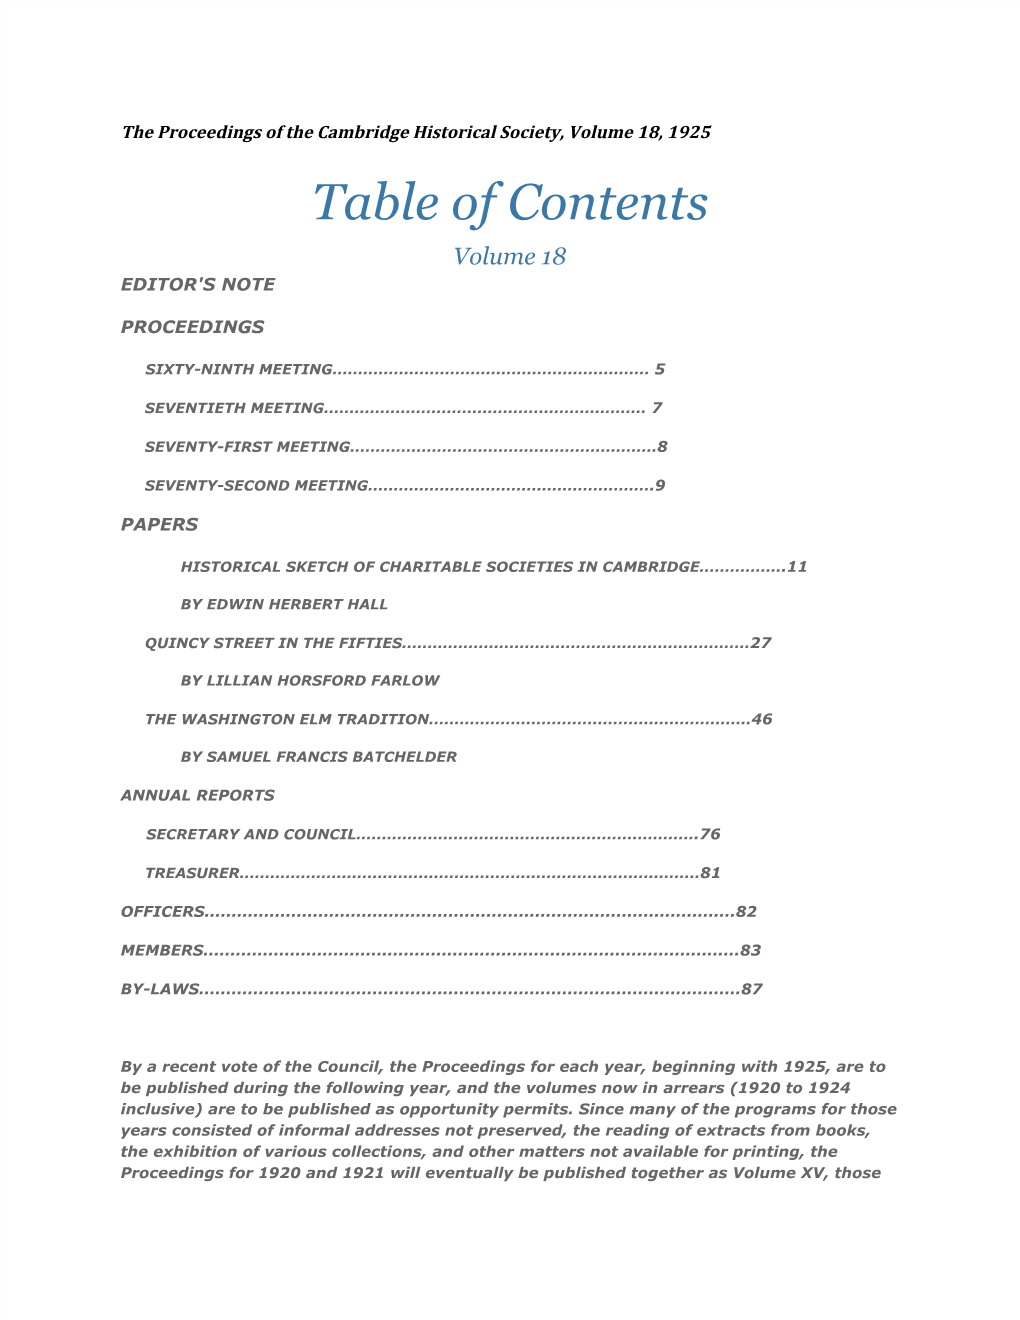 Table of Contents Volume 18 EDITOR's NOTE